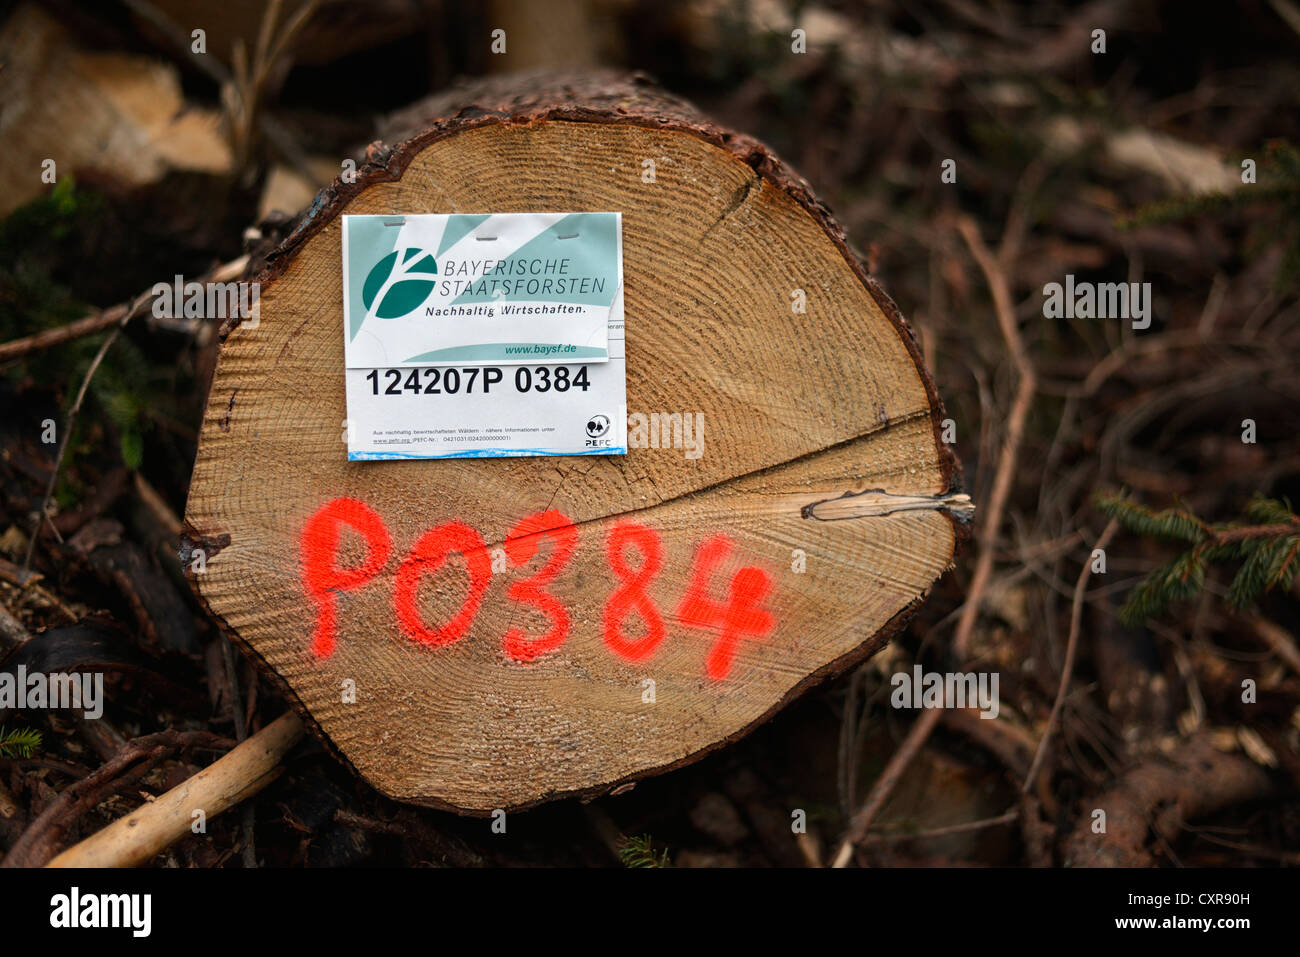 Concept of sustainability, labelling, freshly felled spruce tree from the Bavarian State Forestry, Schliersee, Bavaria Stock Photo